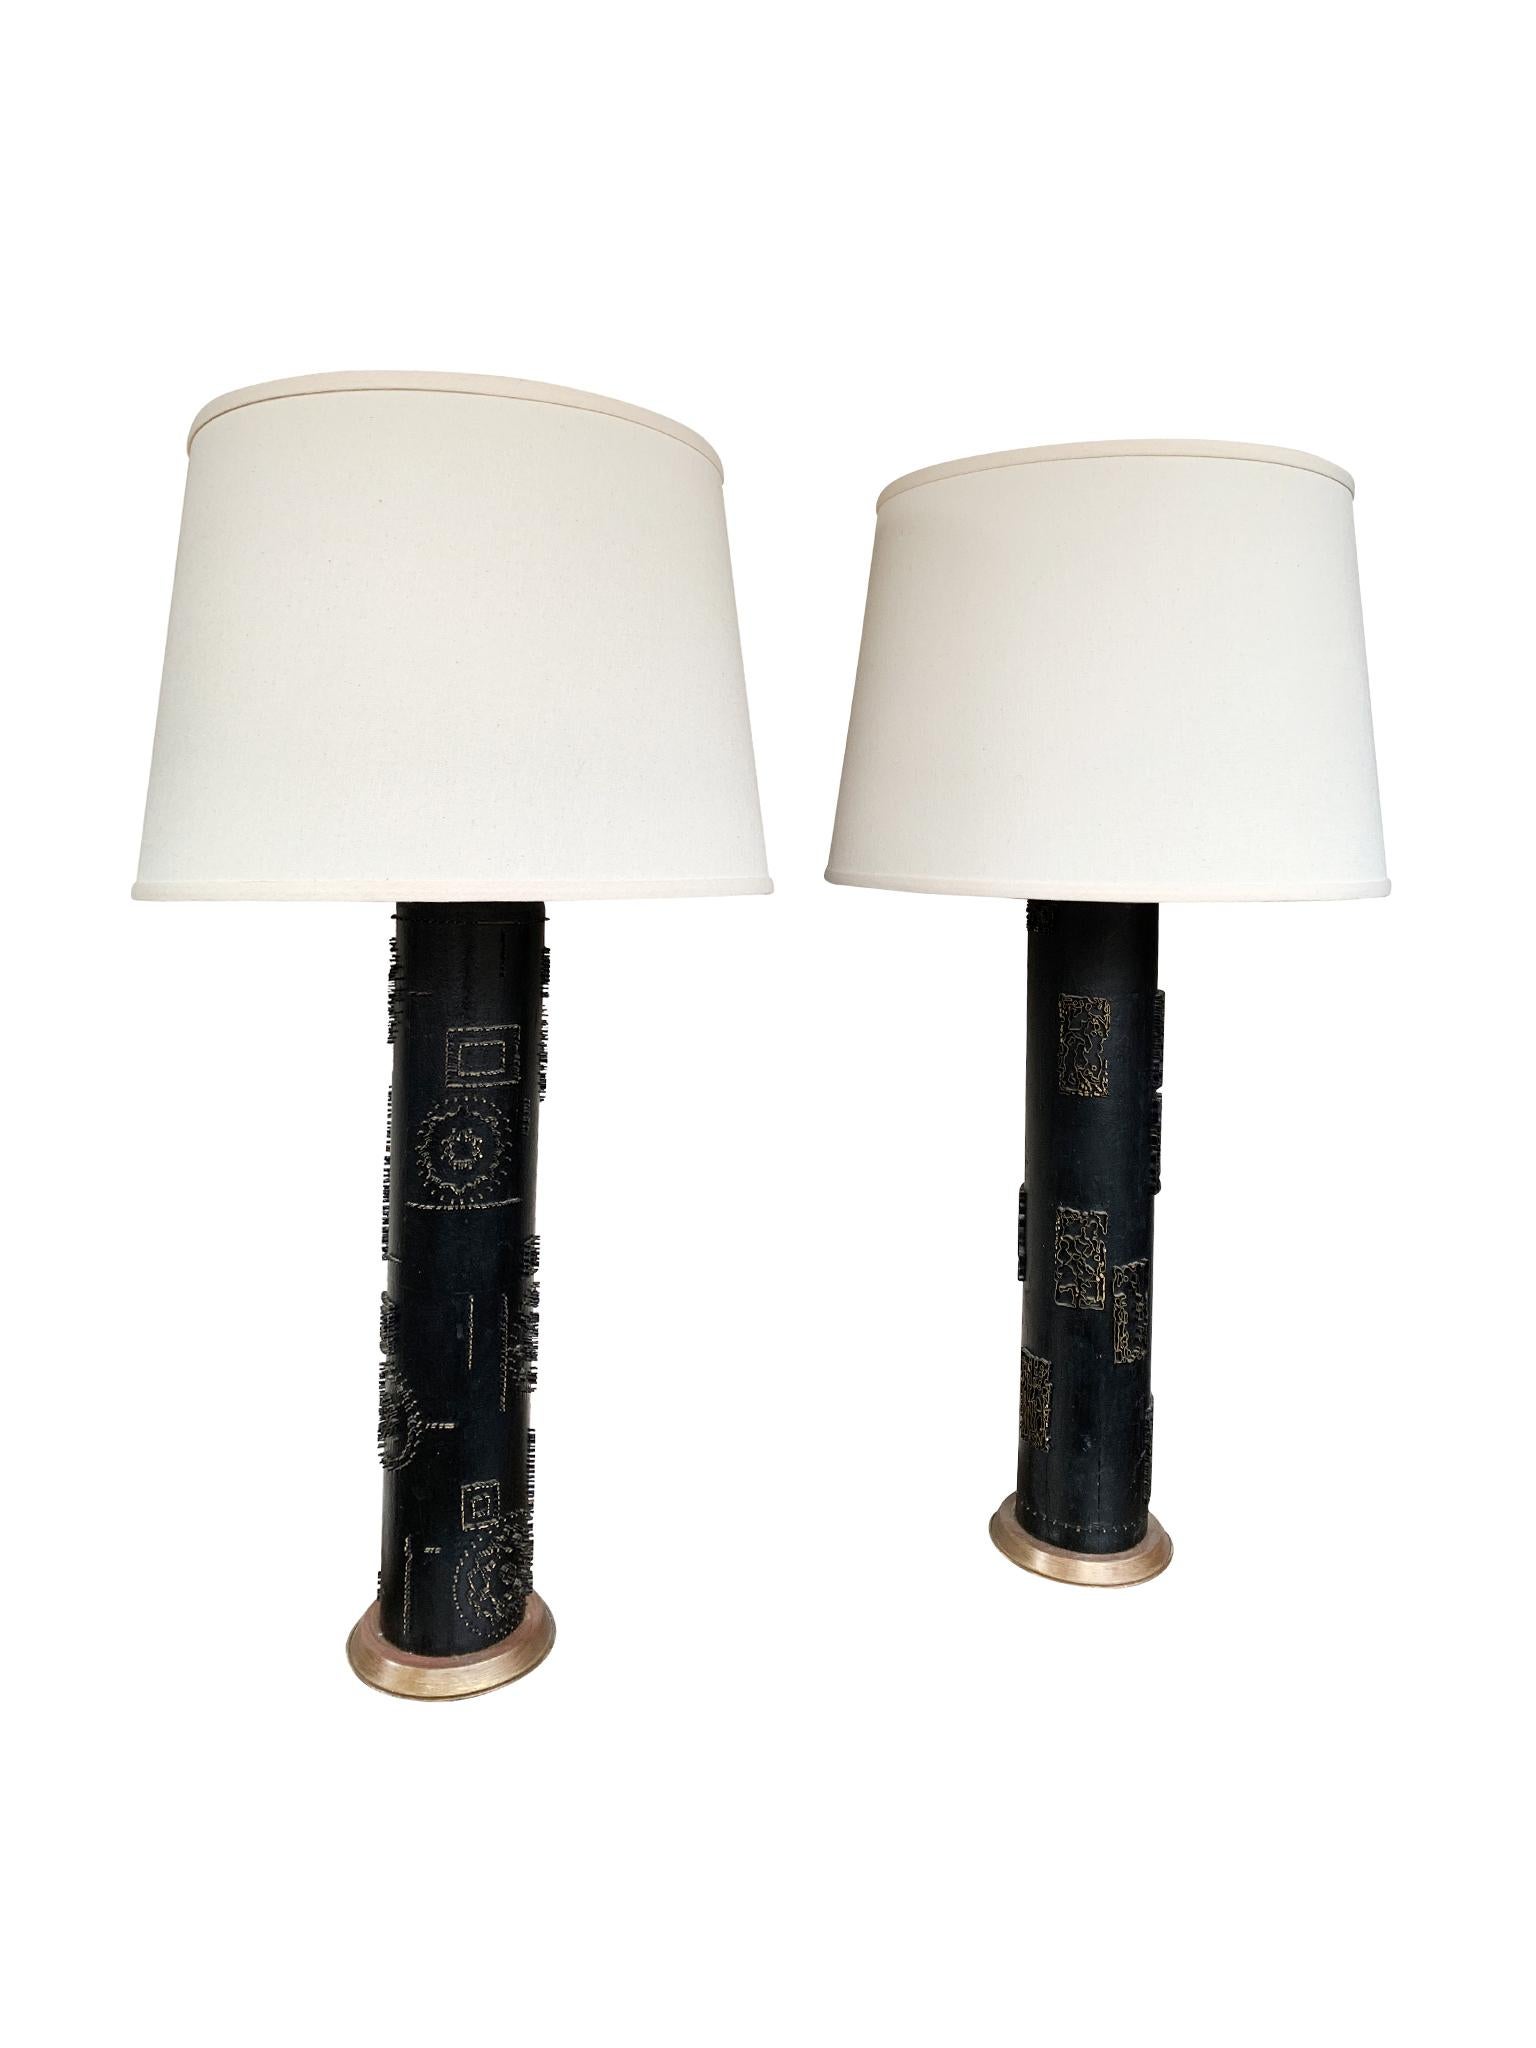 A beautiful pair of table lamps comprising of bases made from converted antique wallpaper rollers. They are black-painted wood with bronze-toned metal appliqué decorations and gold-hued round bases. The hardware is brass with double bulb sockets,